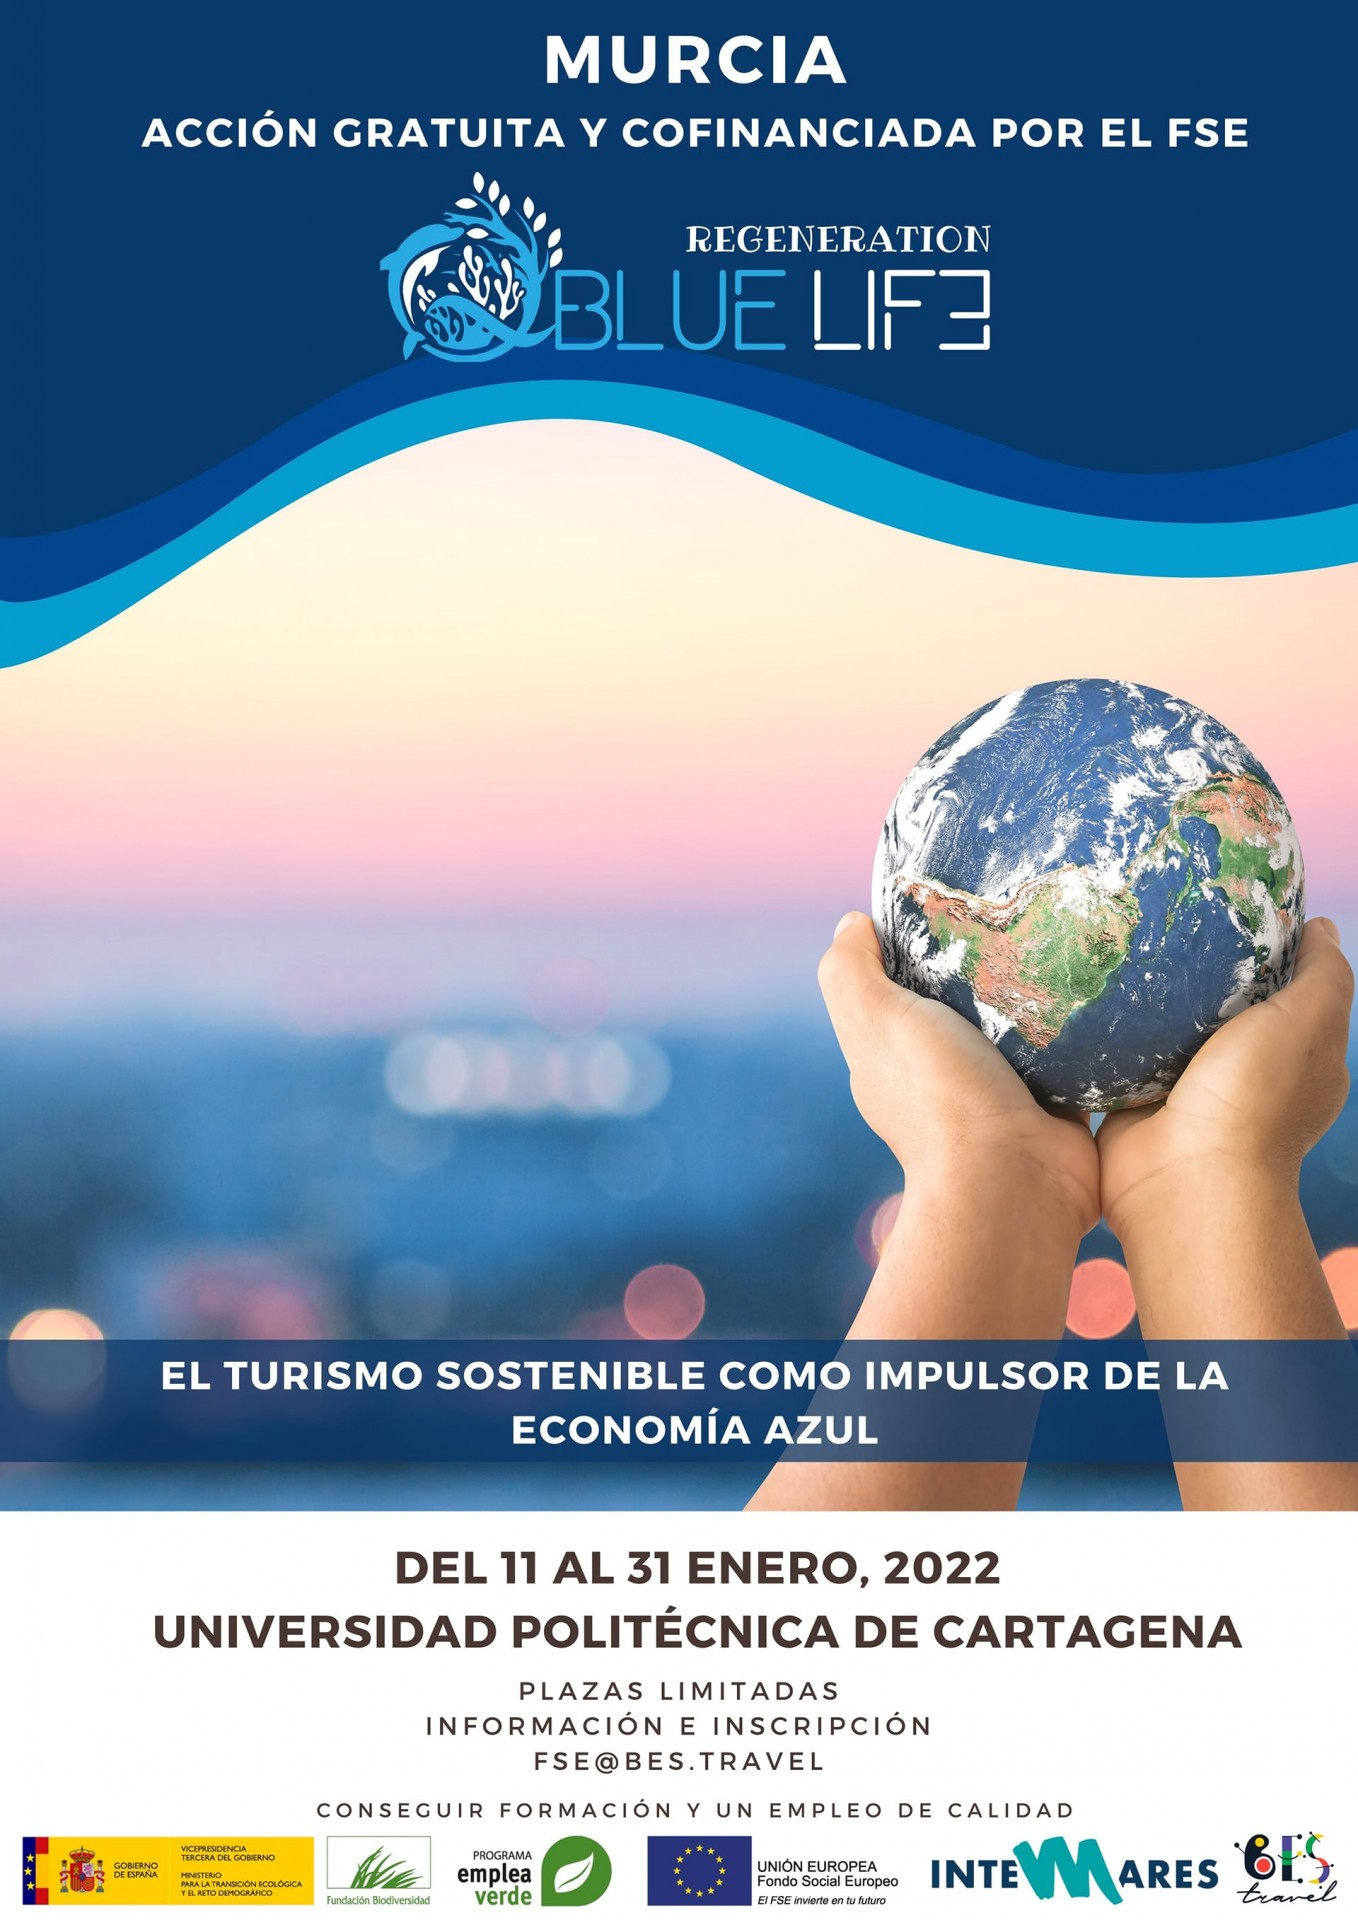 Sustainable tourism as a driver of the Blue Economy, conservation and regeneration of marine ecosystems